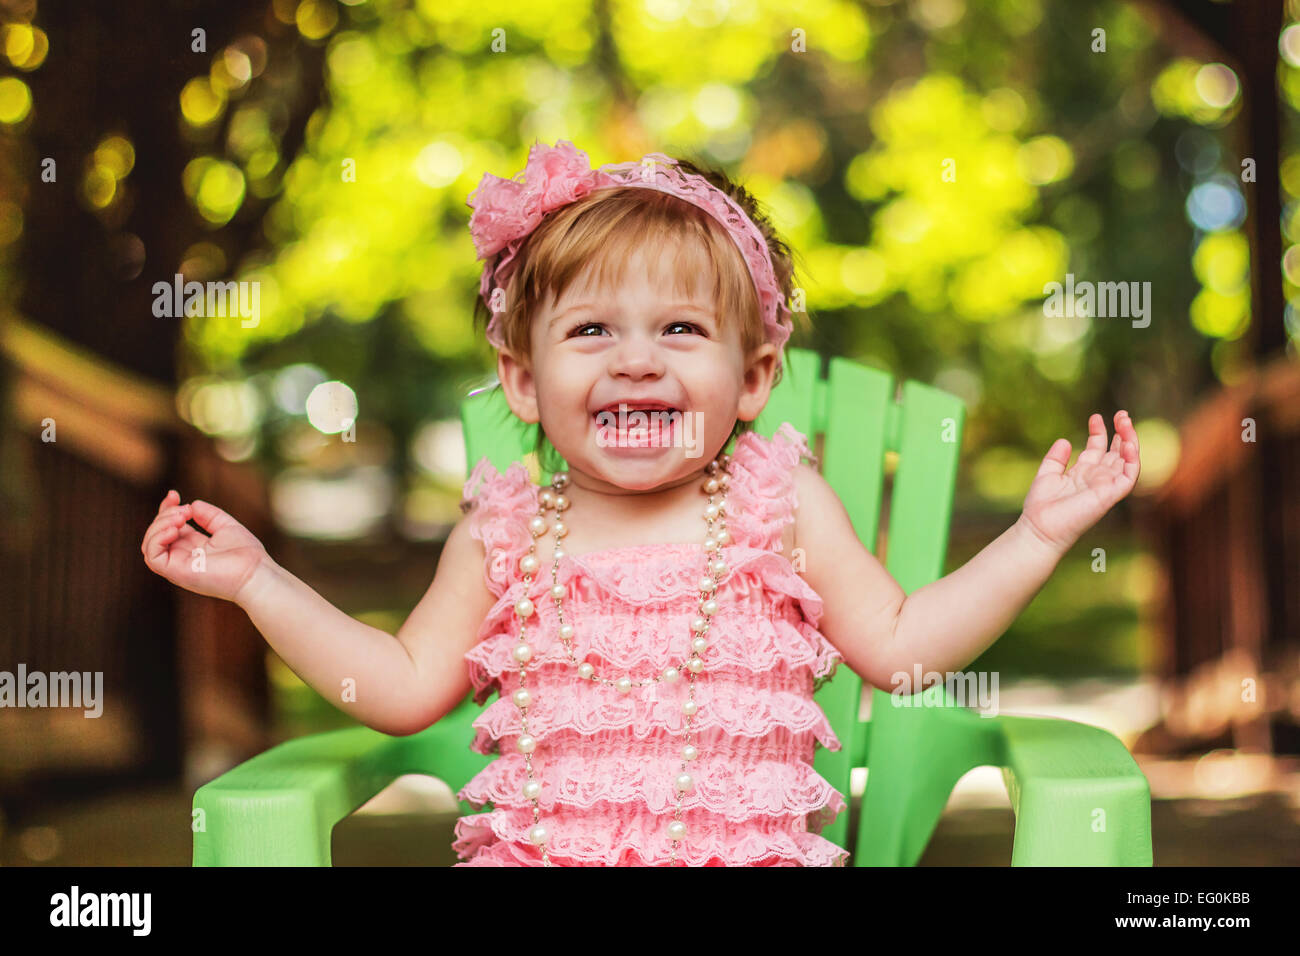 Happy girl in a party dress sitting in garden chair laughing Banque D'Images